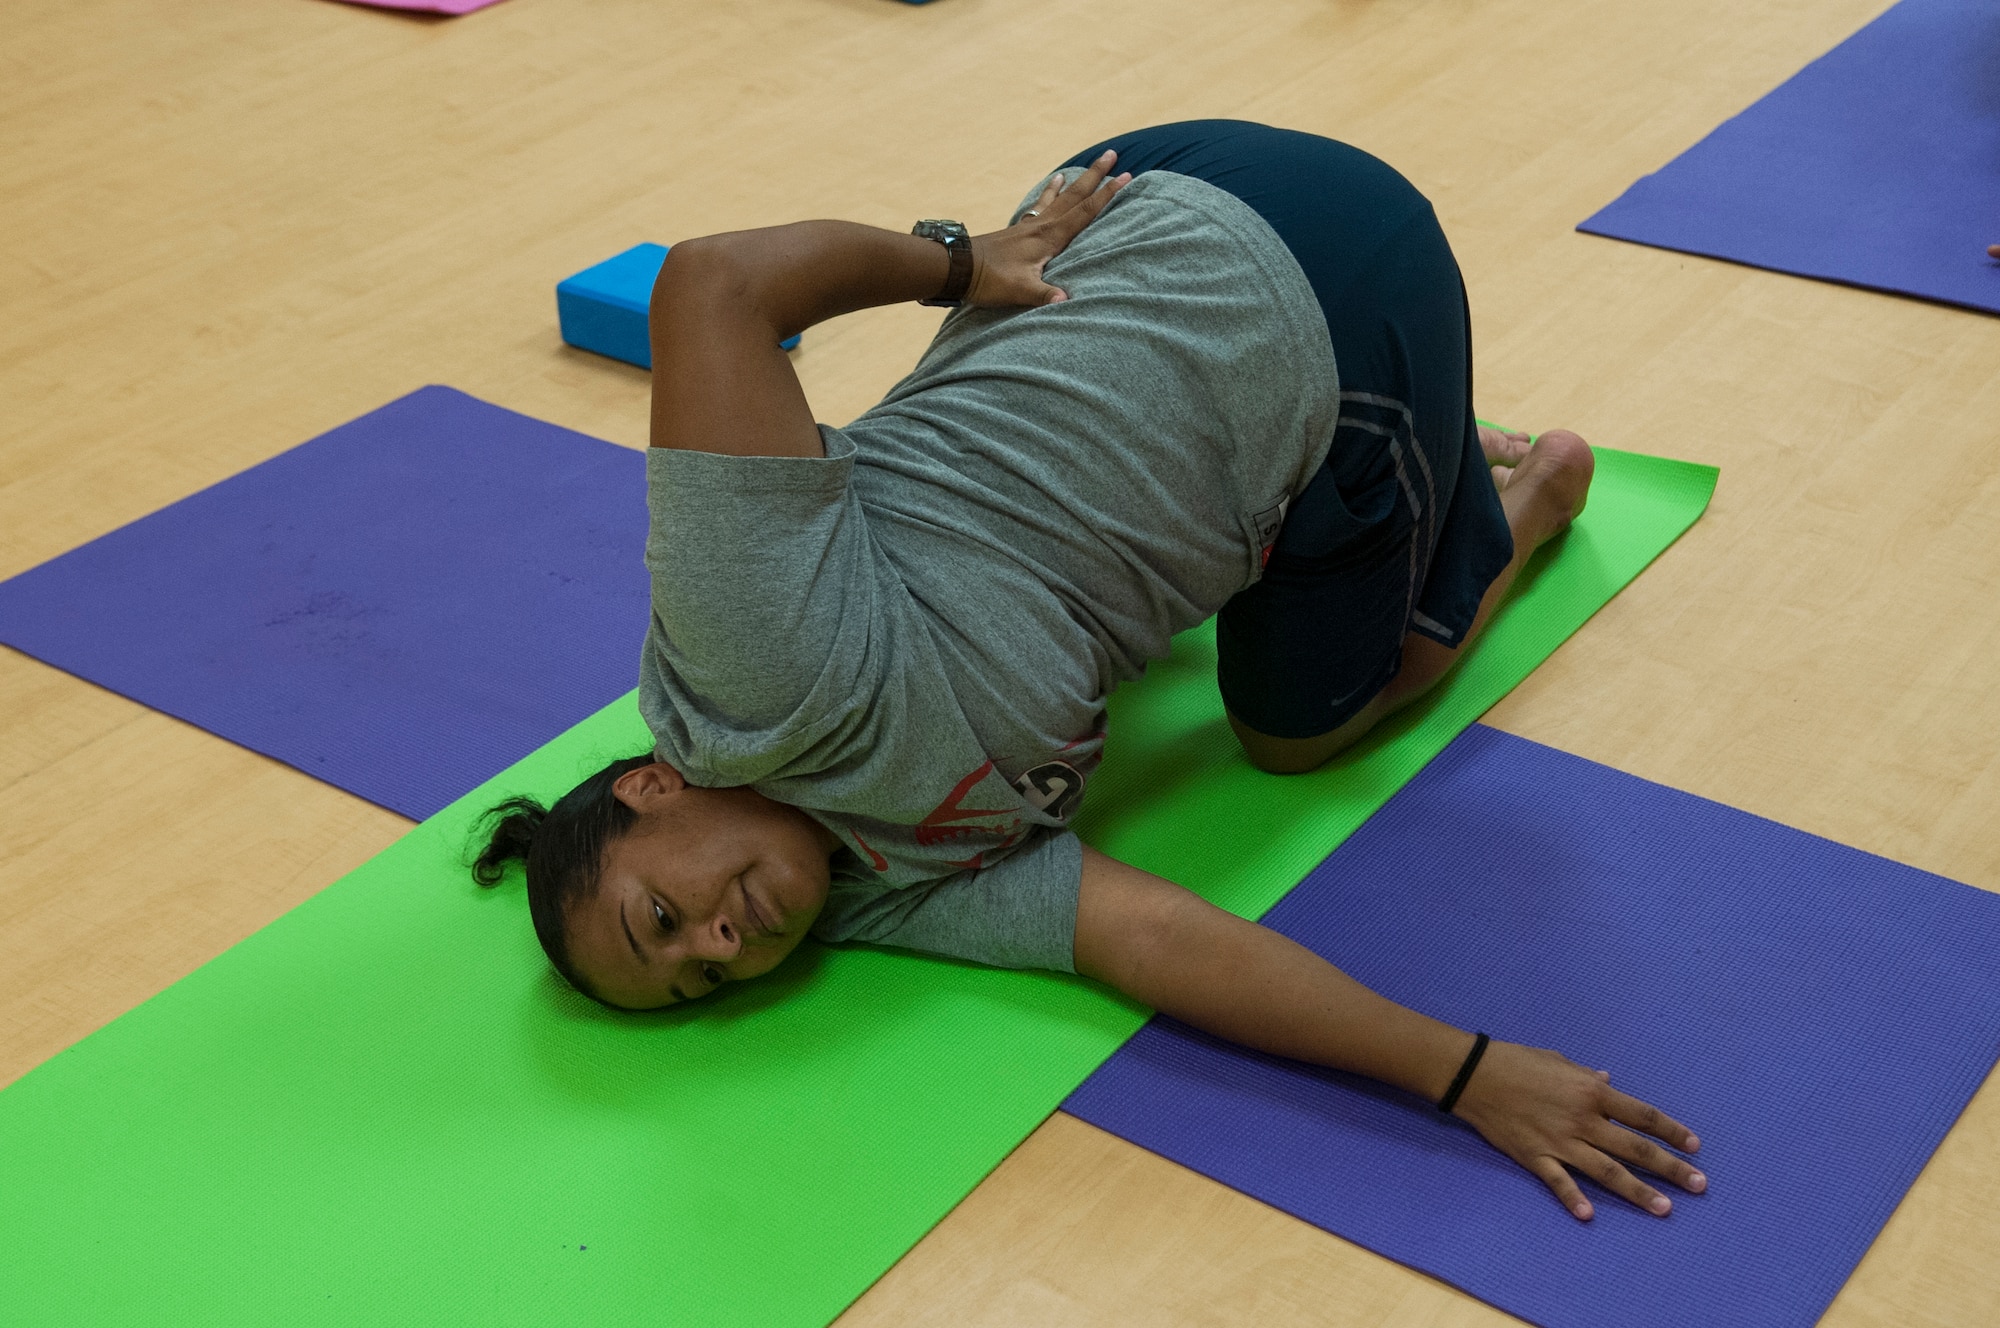 U.S. Air Force Staff Sgt. Iris McDowell twists into a pose during a yoga class at Moody Air Force Base, Ga., July 30, 2013. Twisting poses help improve the spine’s range of motion. (U.S. Air Force photo by Airman 1st Class Sandra Marrero/released)
